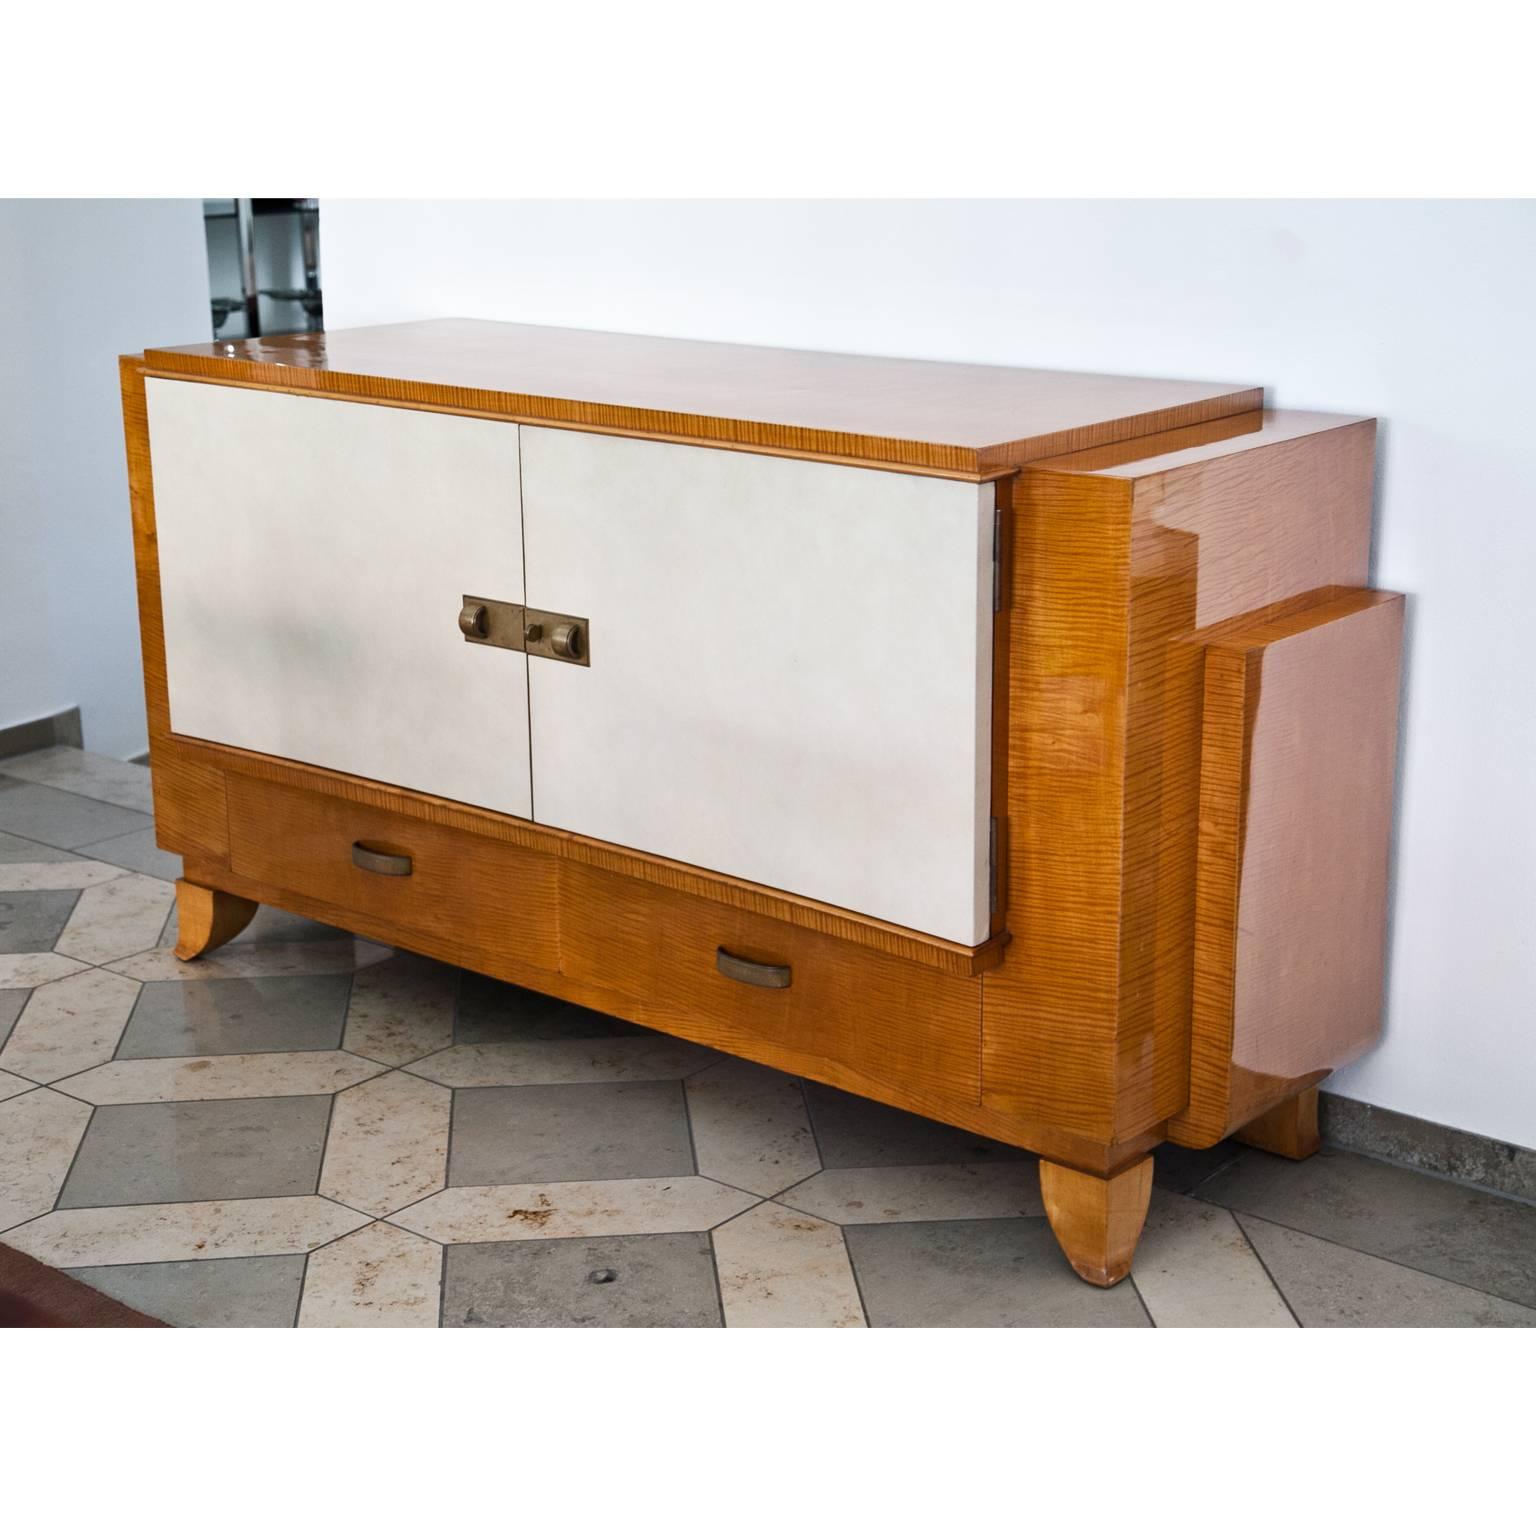 French Art Deco Sideboard, France, 1940s